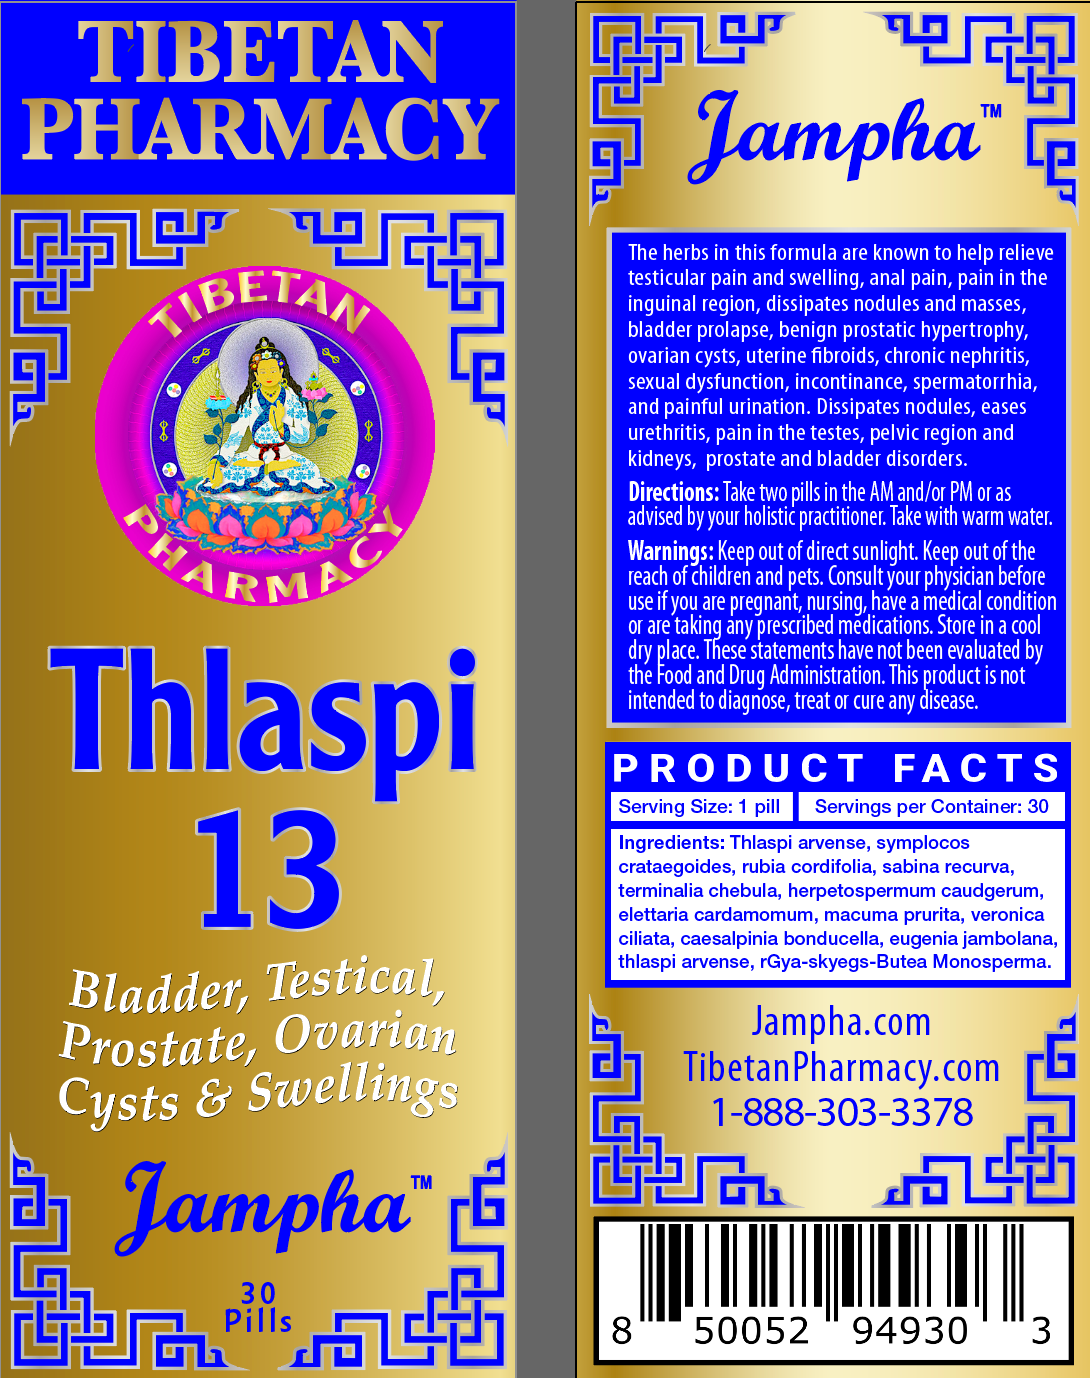 Thlaspi 13 | Reproductive and Urinary Health